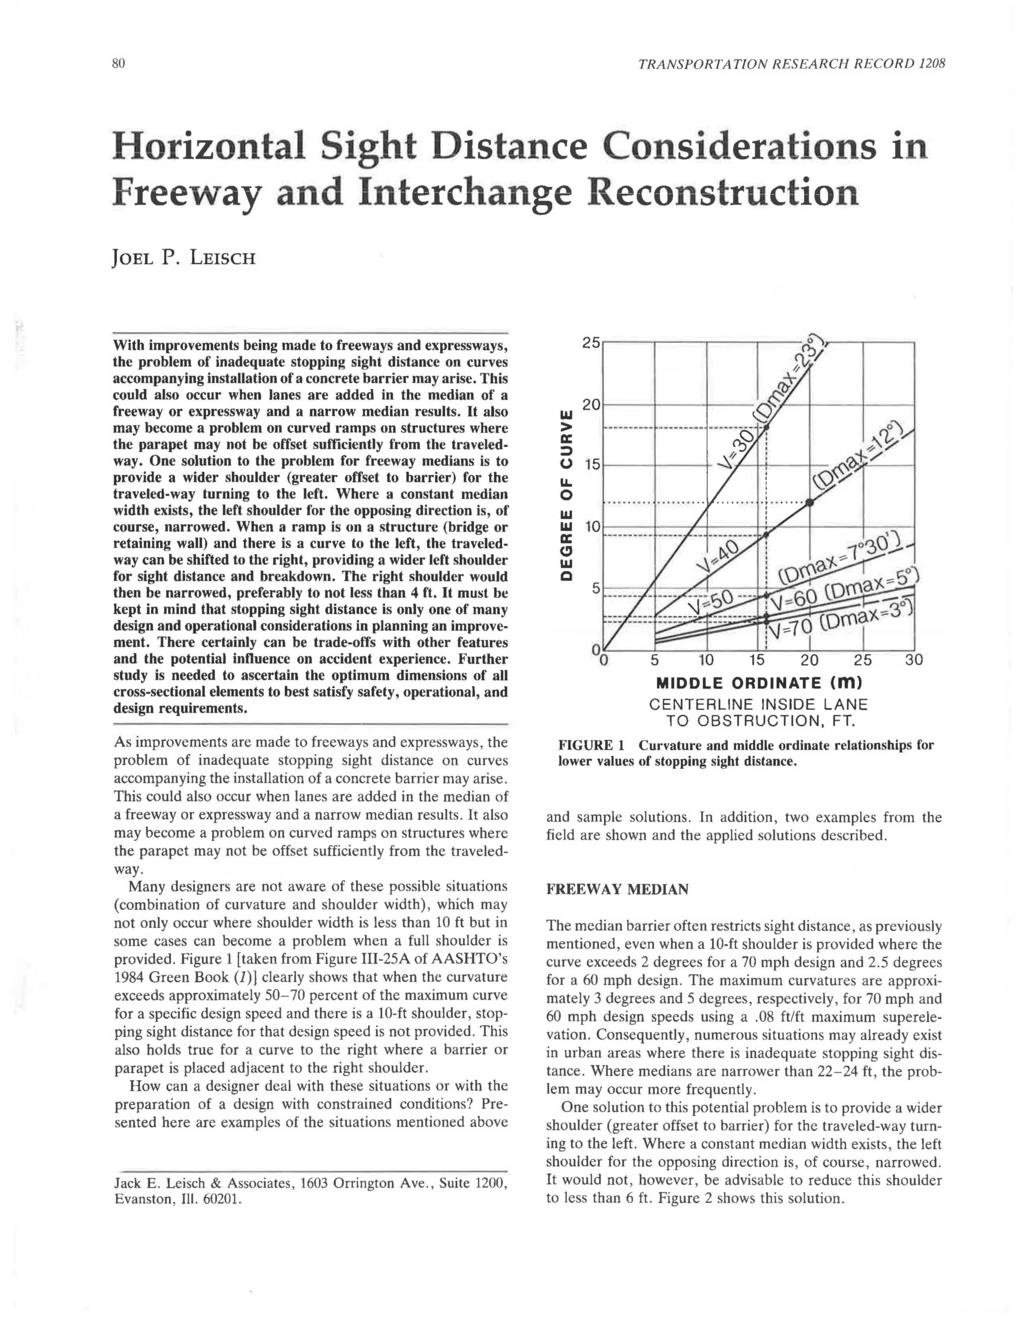 80 TRANSPORTATION RESEARCH RECORD 1208 Horizontal Sight Distance Considerations Freeway and Interchange Reconstruction In JOEL p.